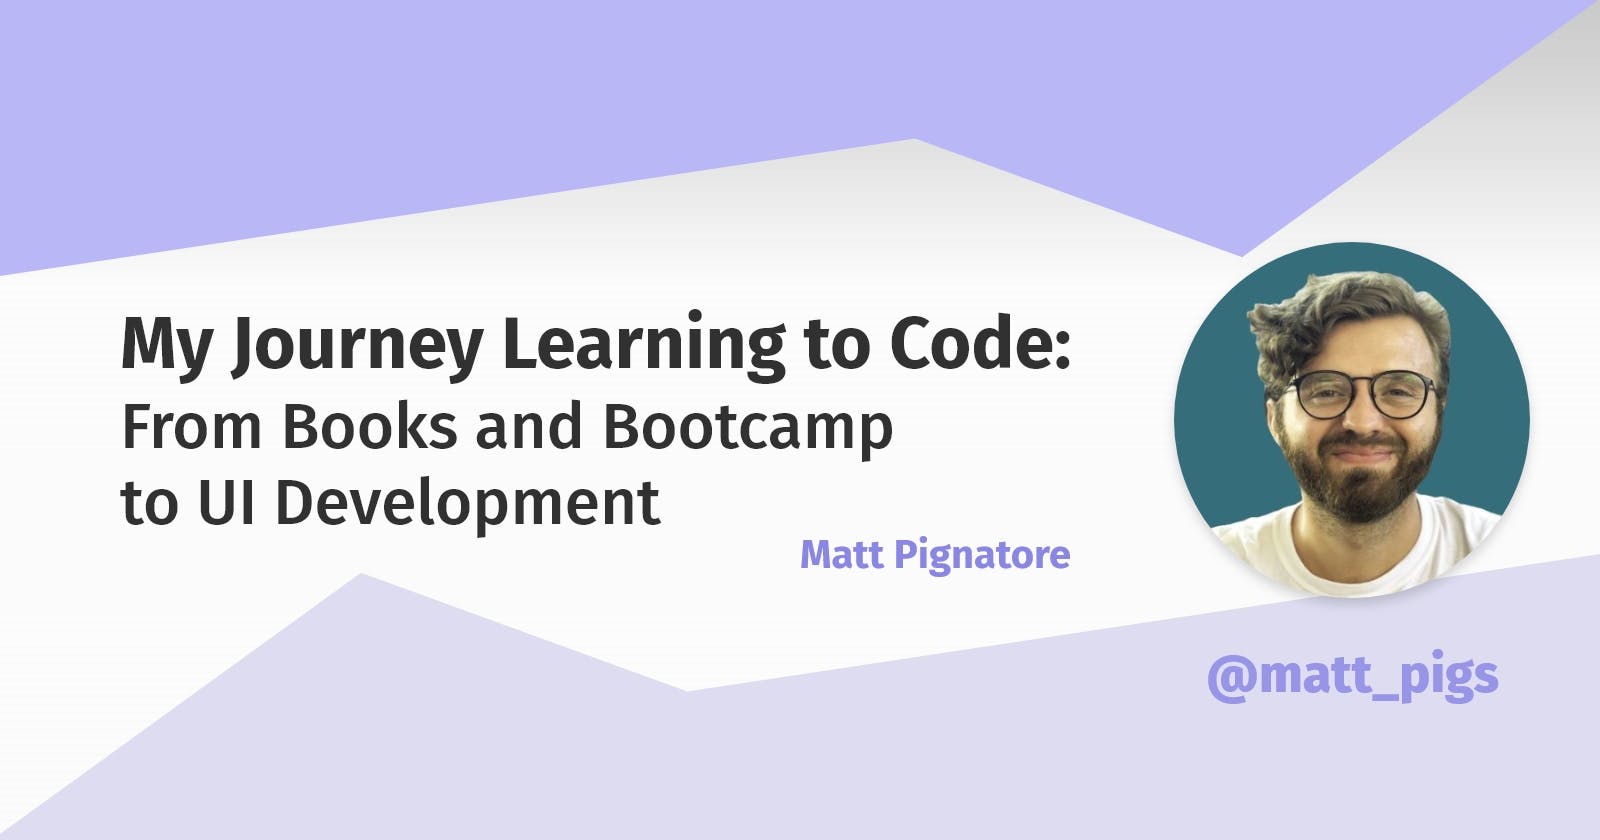 My Journey Learning to Code: From Books and Bootcamp to UI Development